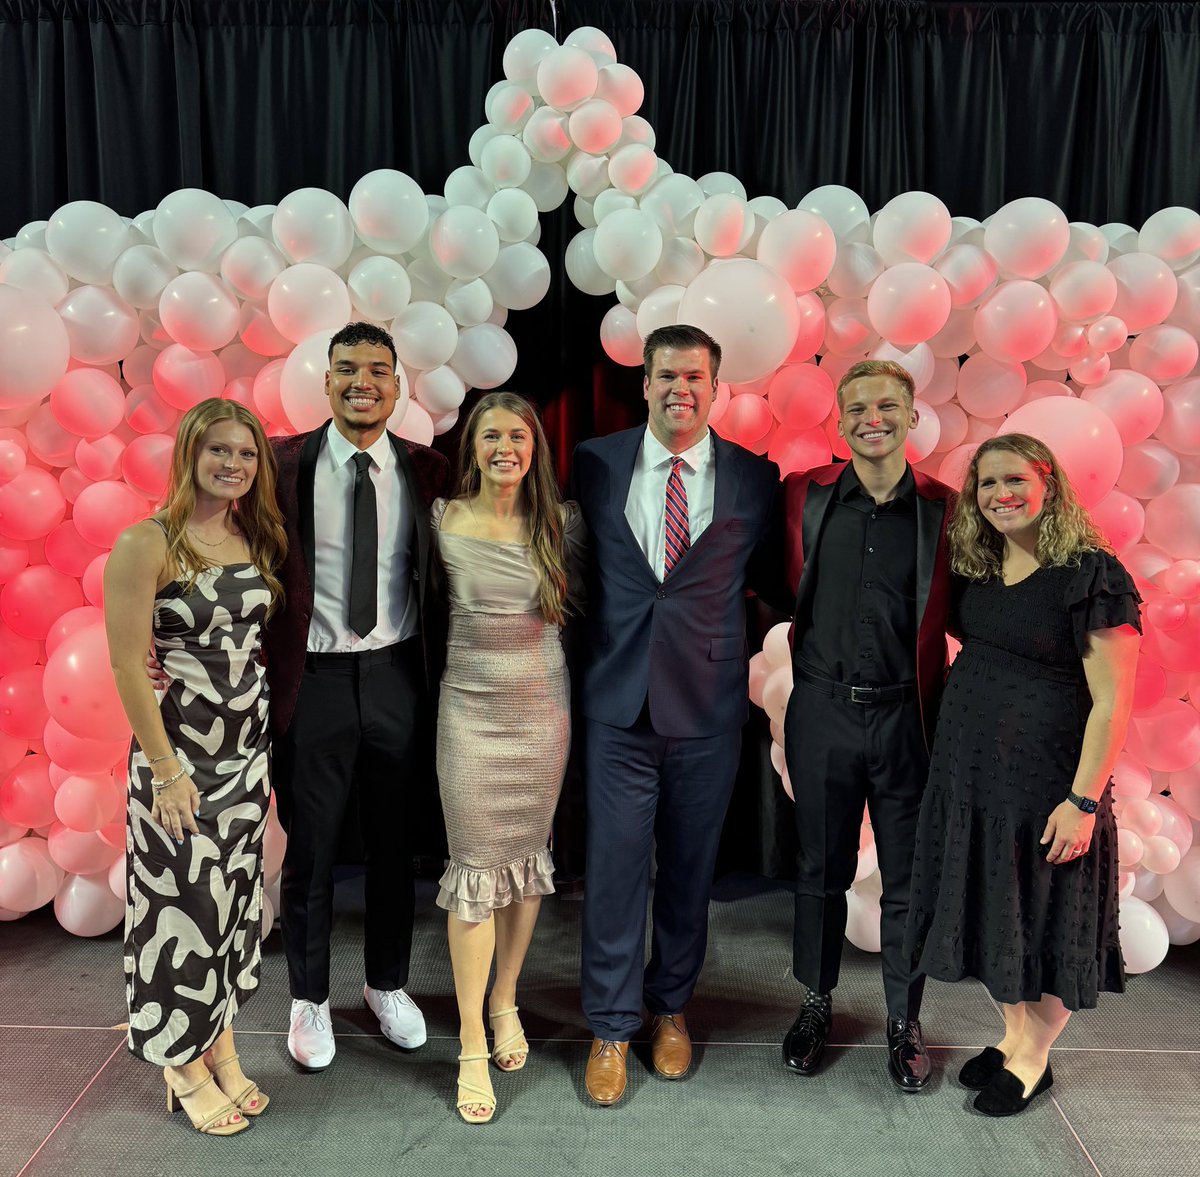 The @HilltopperCLIMB Staff was on 🔥 last night at the TOPSY Awards! @audreygriff24 named Staff Member of the year! Intern @jaylen_dorsey22 Community Champion! Intern Tyler “Fluff” Olden Hilltopper Spirit Award! Thankful to work with the BEST staff in the country! #GoTops